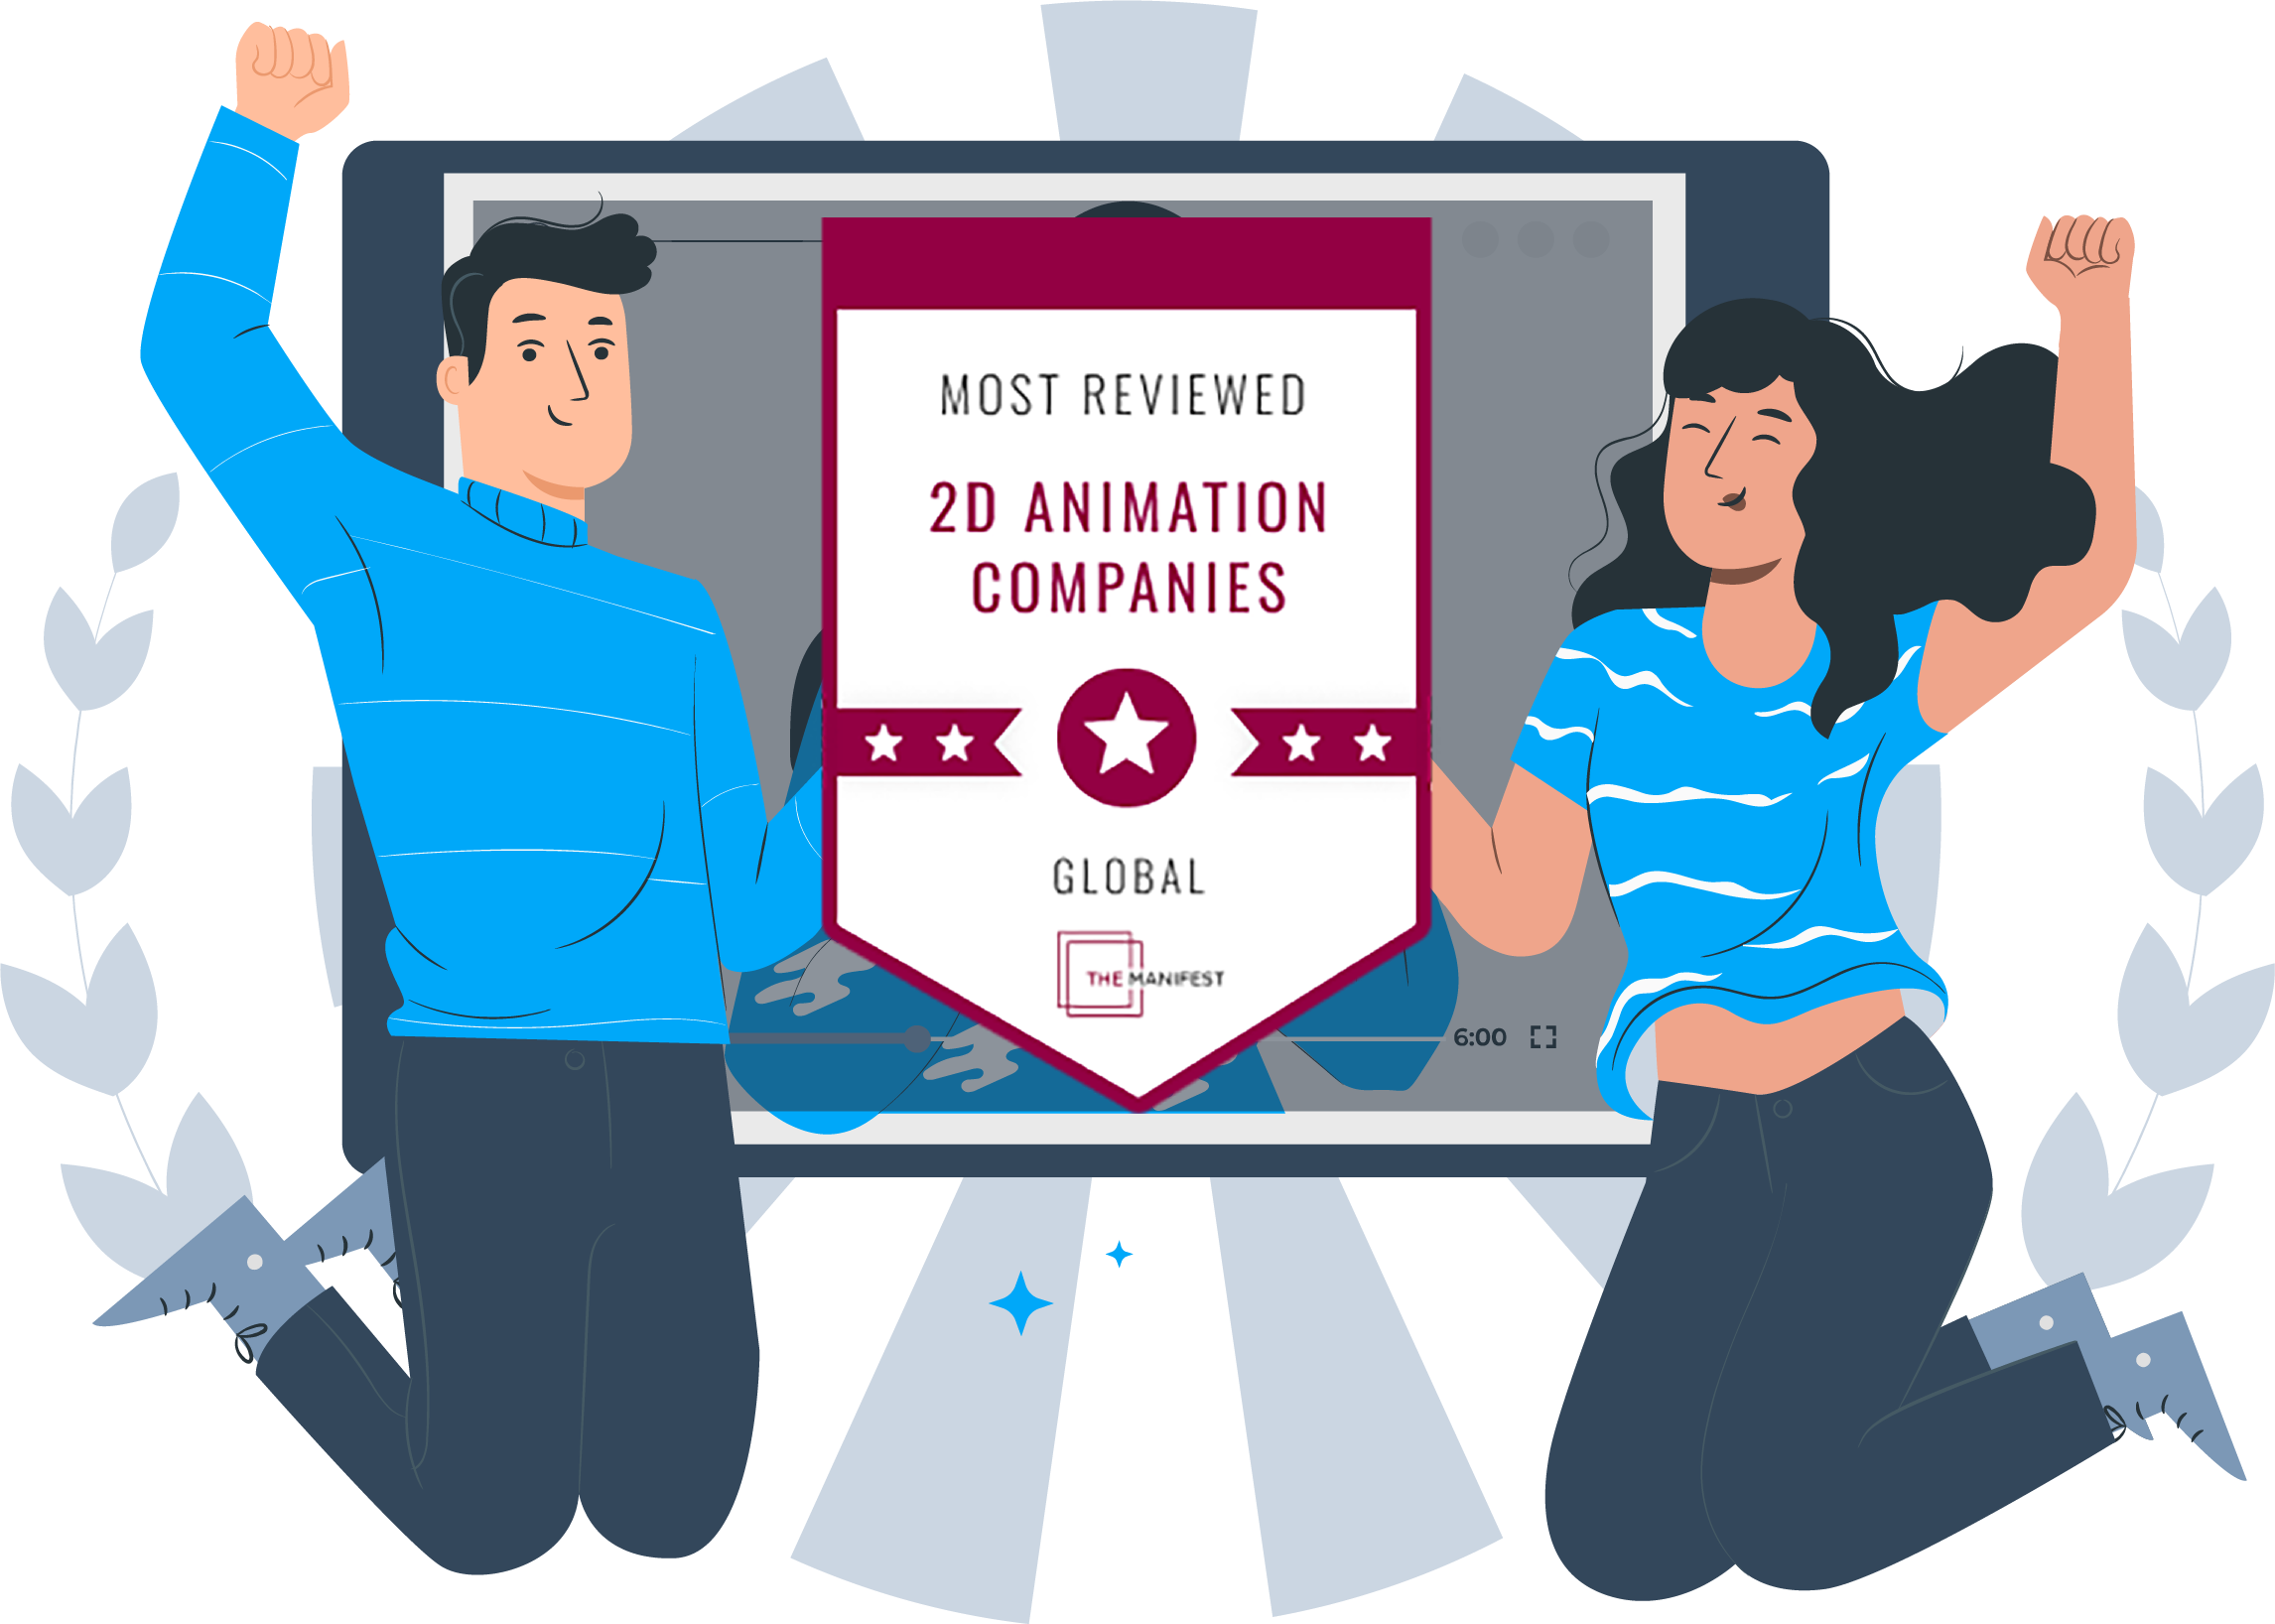 The Manifest crowned webdew as the most reviewed Global 2D Animation Company